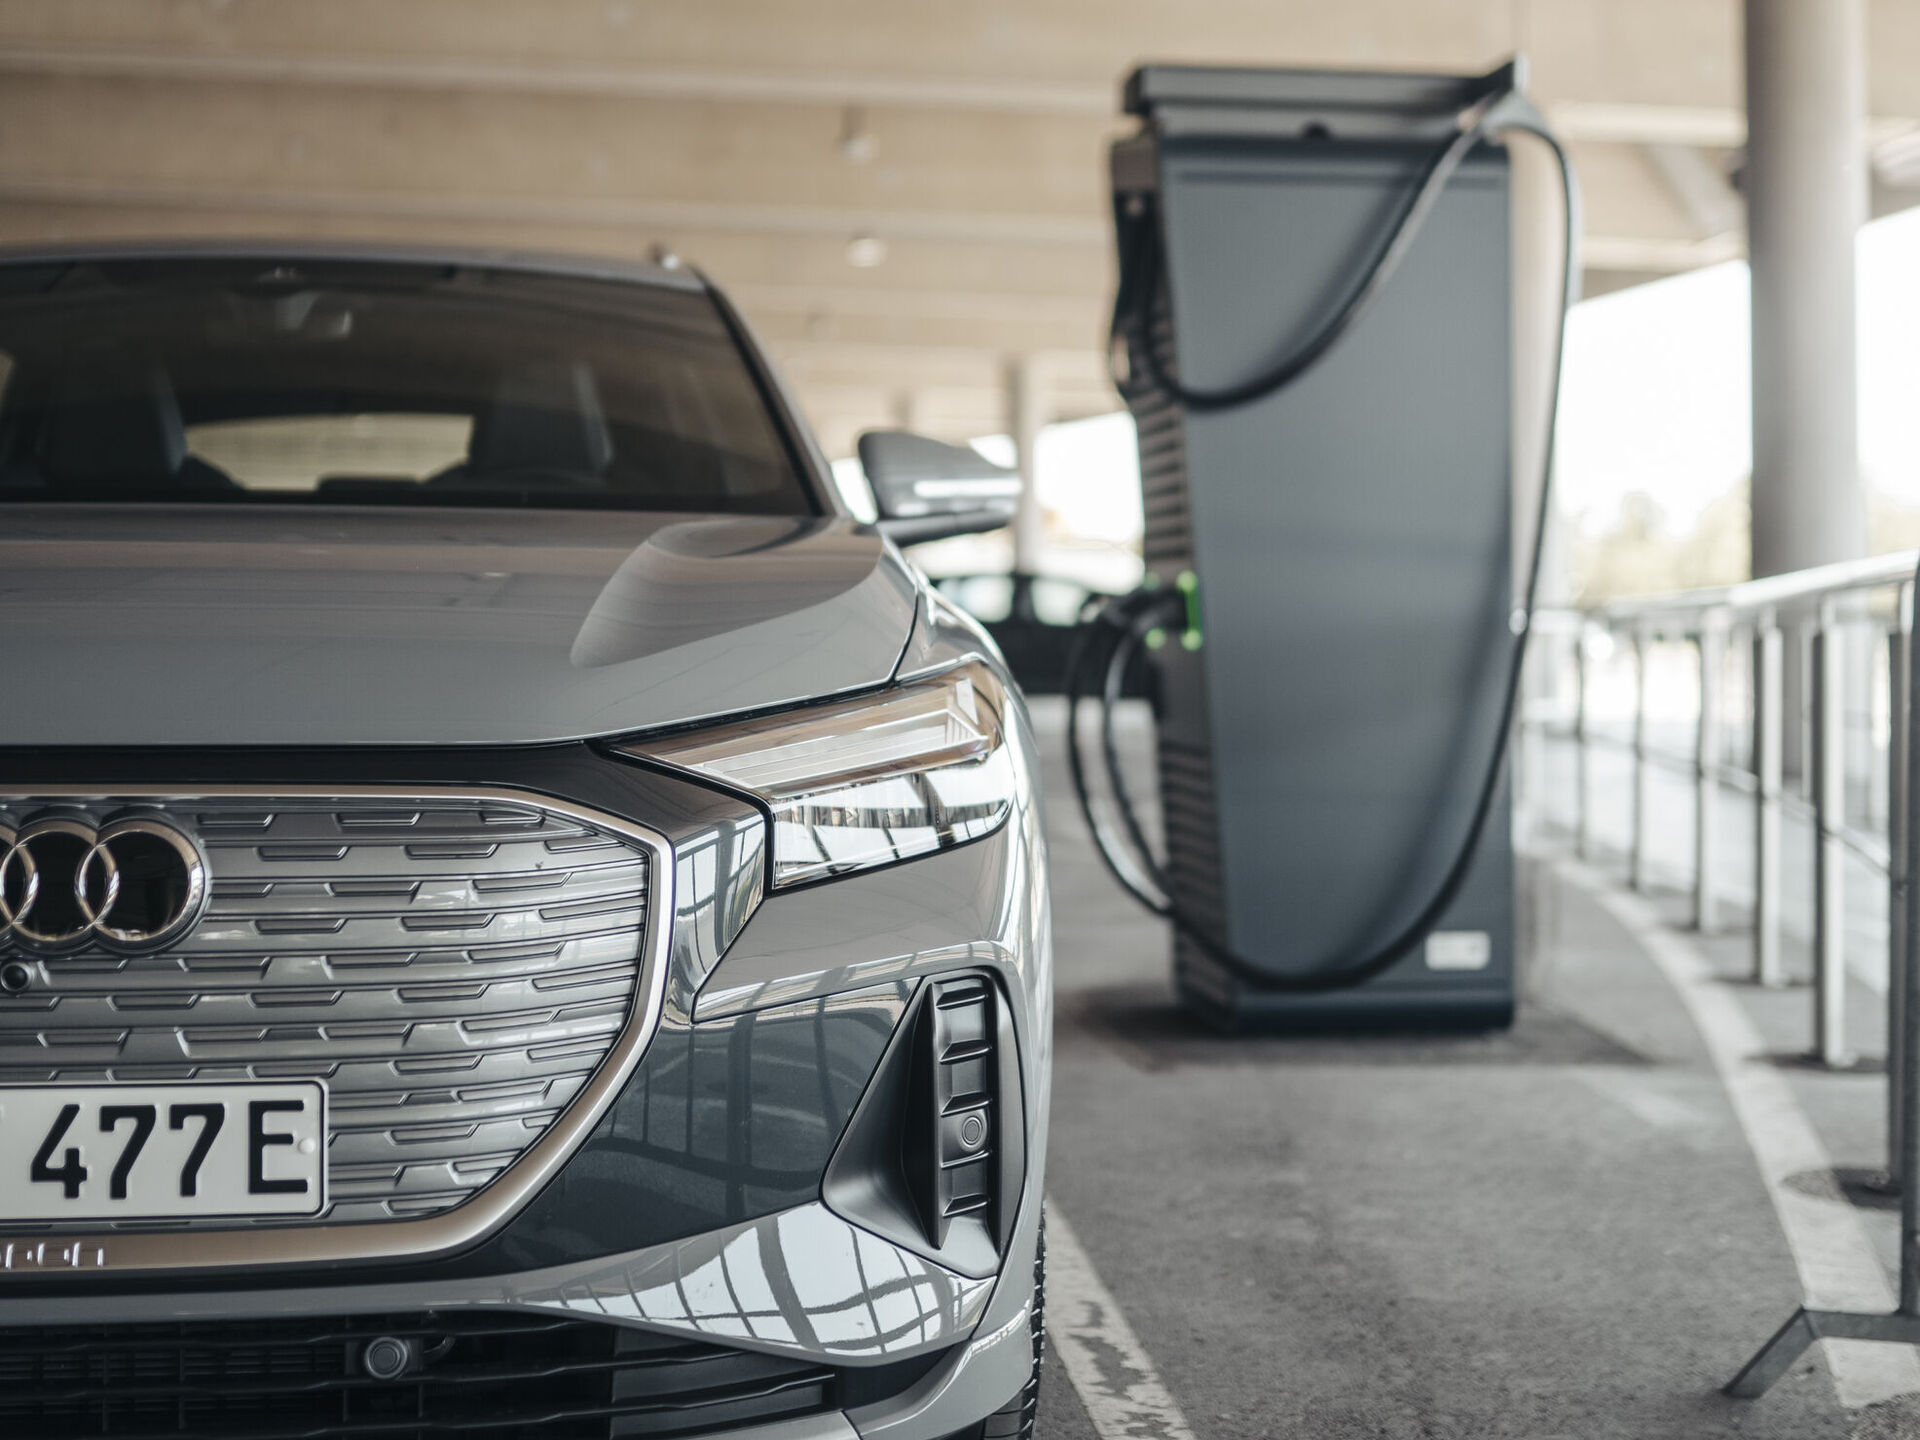 POWER Charger from MOON with cable management system charges an audi